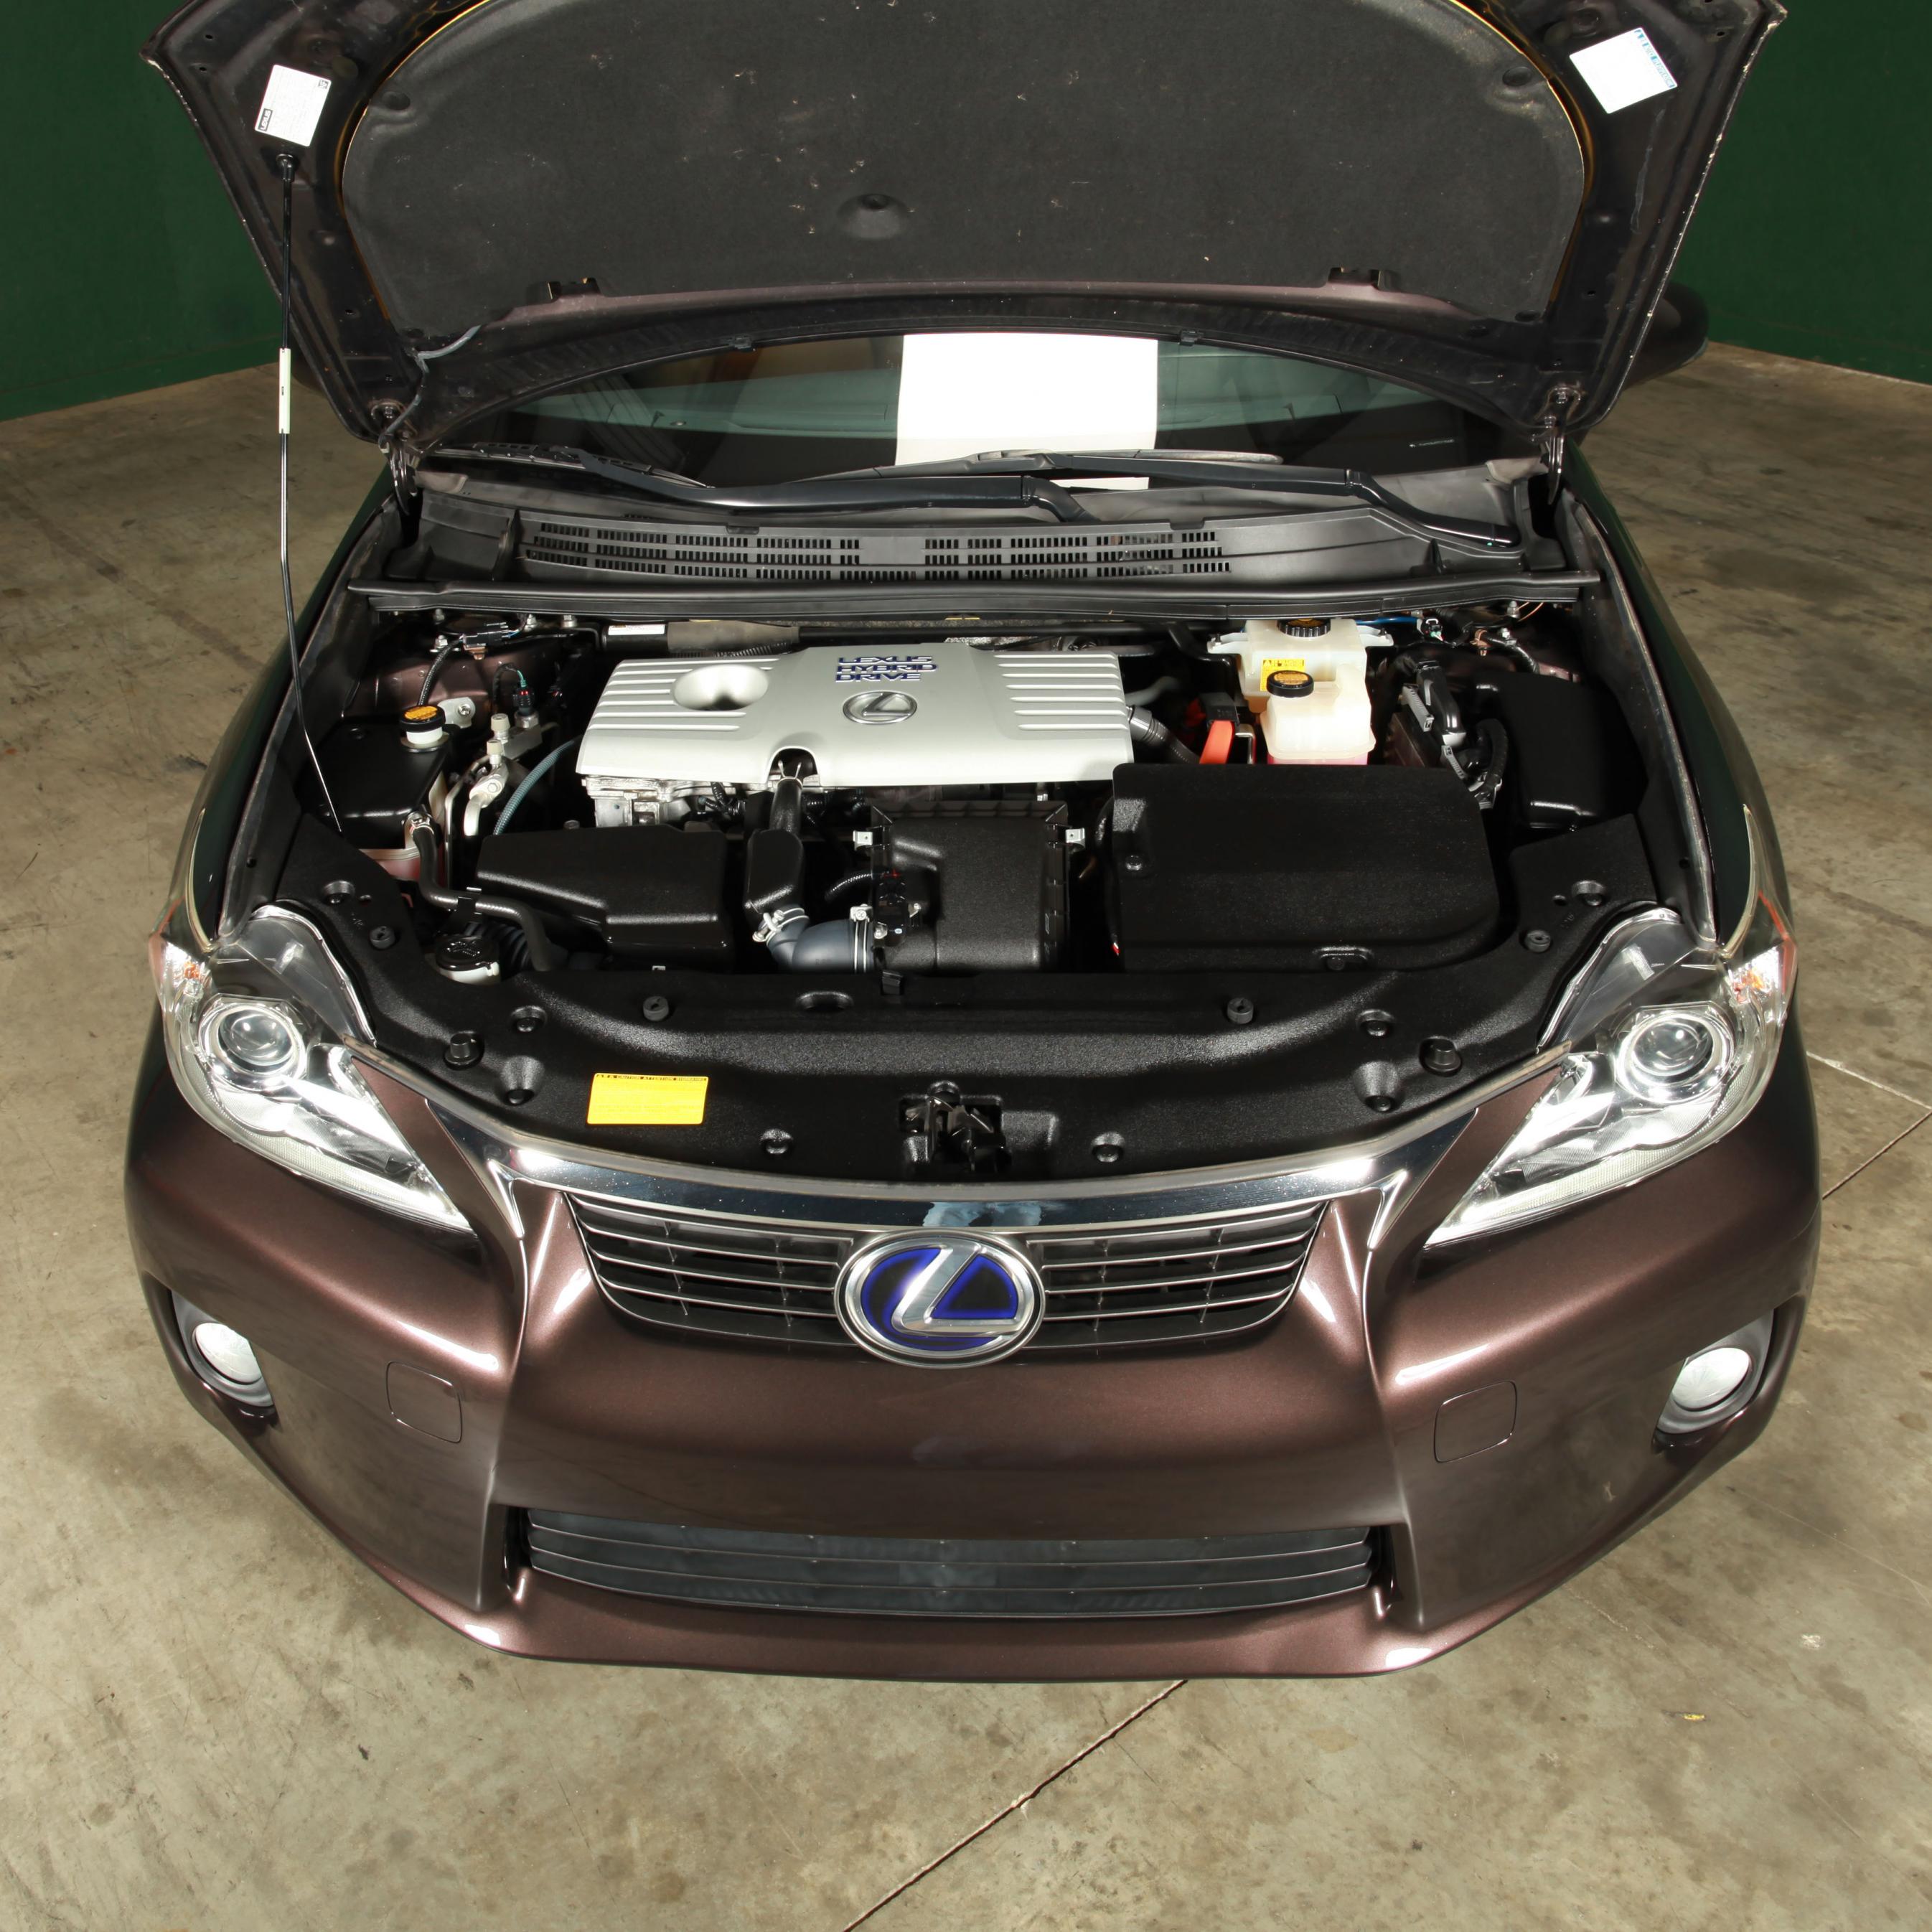 Auto Obsessed - Clean engine bay now for this Lexus CT200h hybrid  hatchback! We used P21S Total Auto Wash (autoobsessed.com/shop/ p21s-total-auto-wash-1000ml-wsprayer-p-267.html) with an 8 Boar's Hair  Brush (autoobsessed.com/shop/boars-hair-wheel-brush